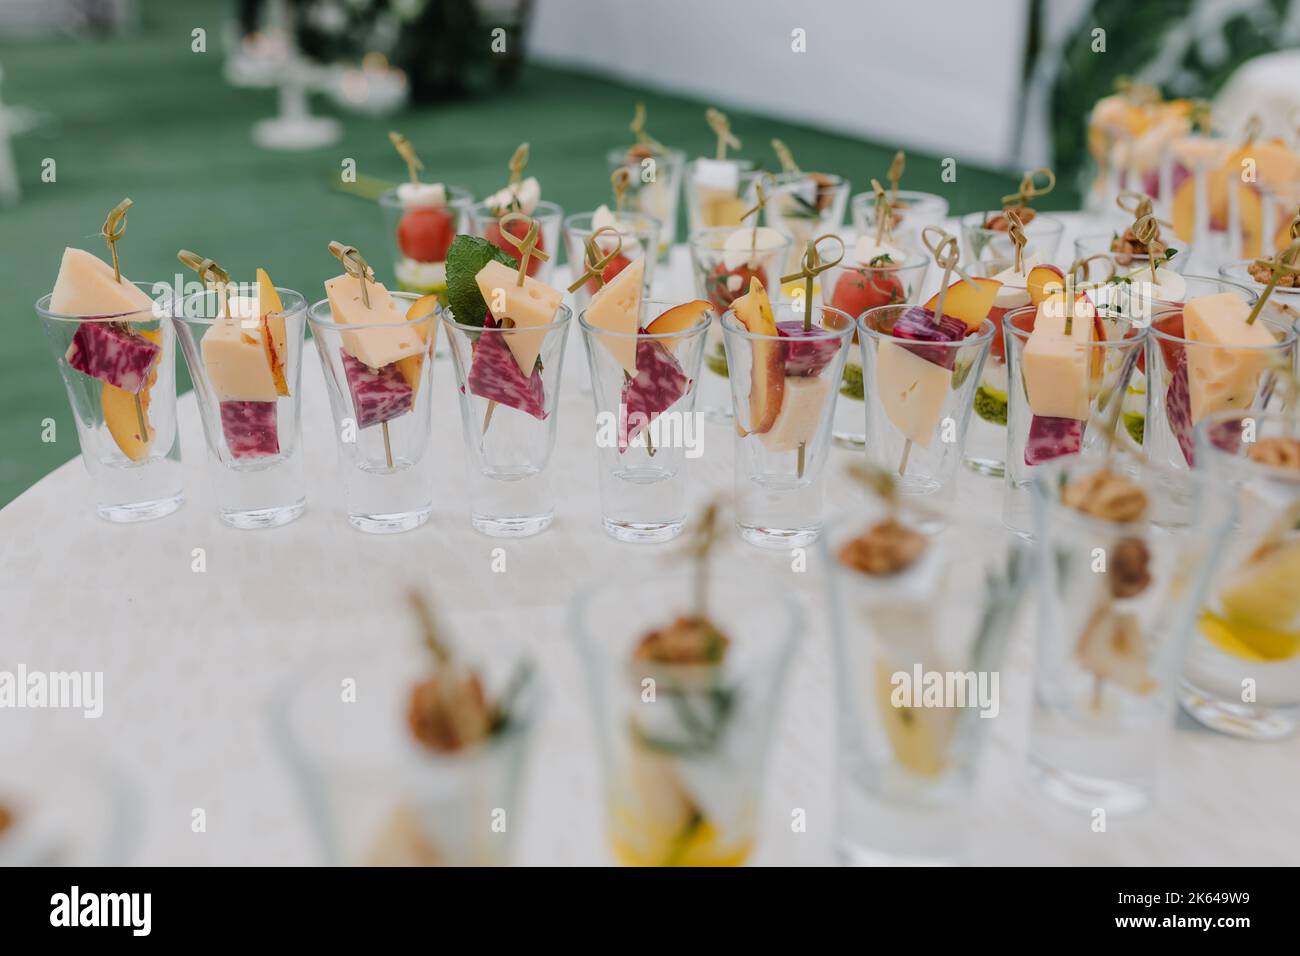 Snacks on the holiday with toothpicks in glasses. Side view Stock Photo